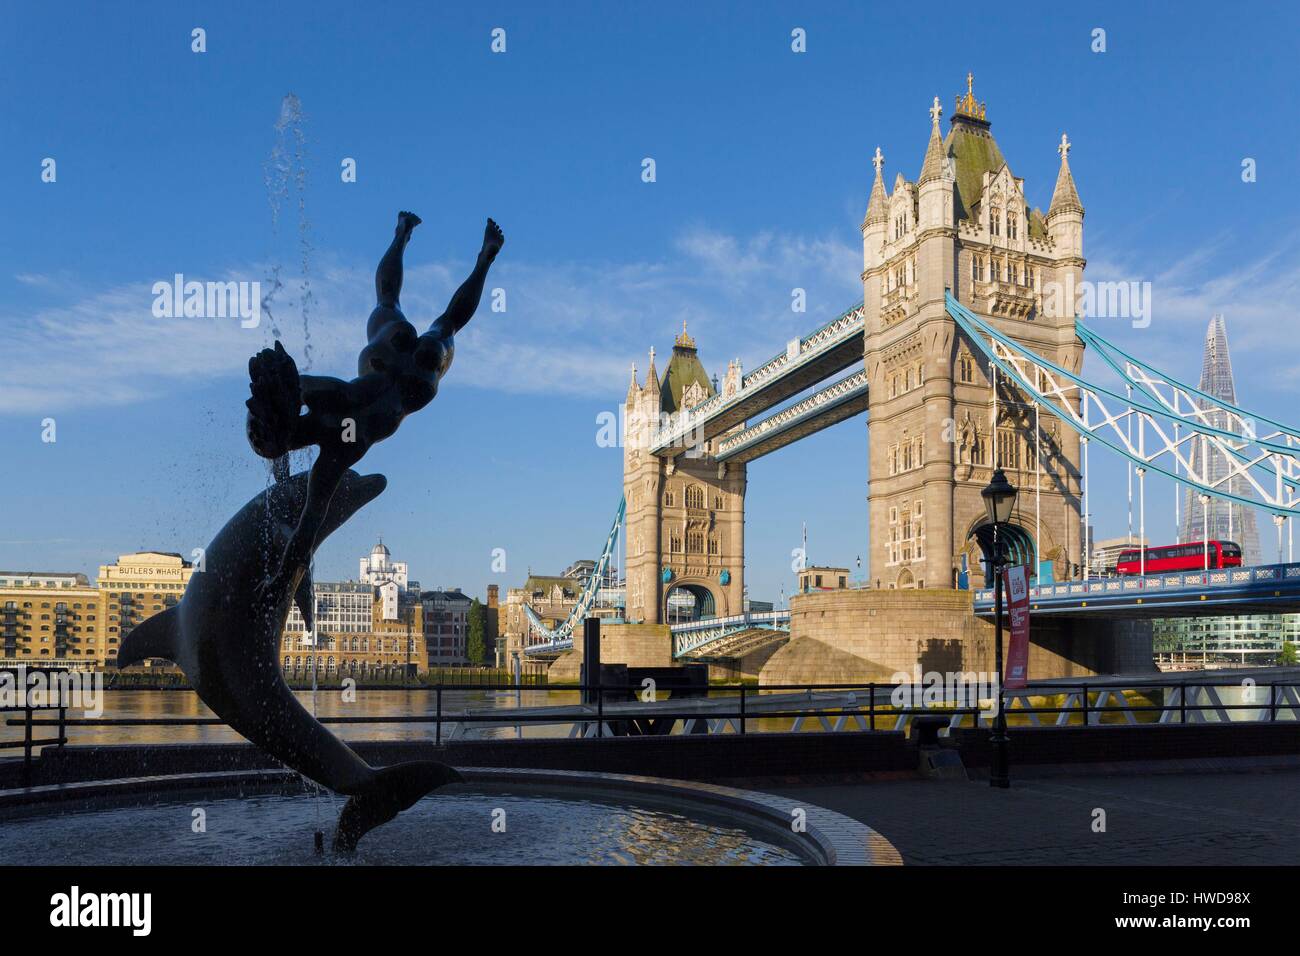 United Kingdom, London, Tower Bridge, Girl with a dolphin statue by David Wynneat in the background the Tower The Shard by architect Renzo Piano Stock Photo